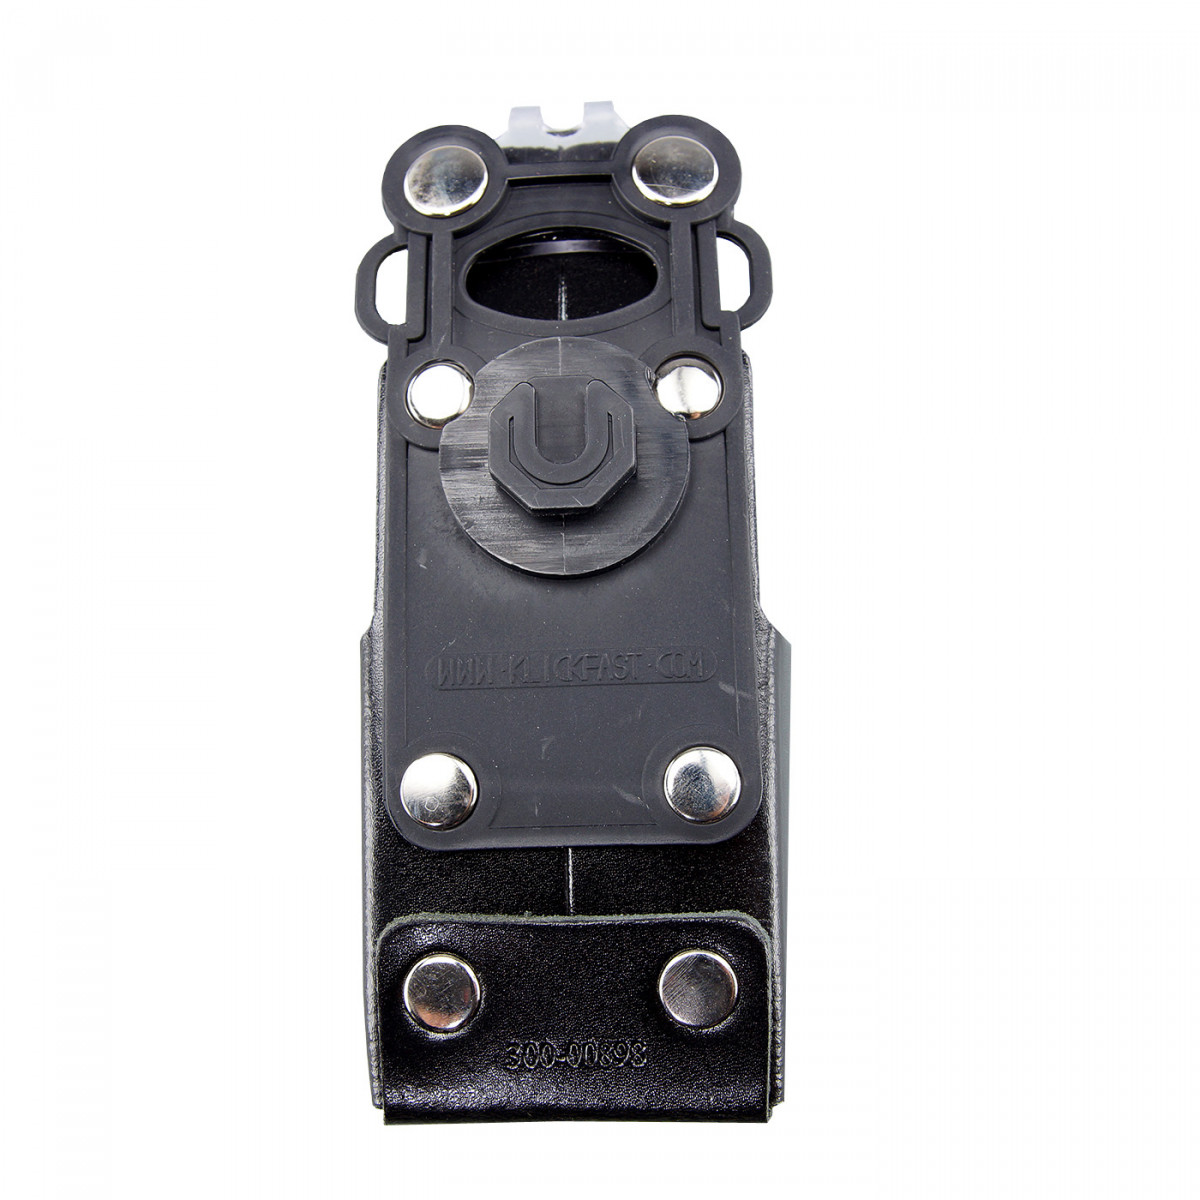 SEPURA carrying holster with click-fast retaining button for STP8X ATEX 300-00898